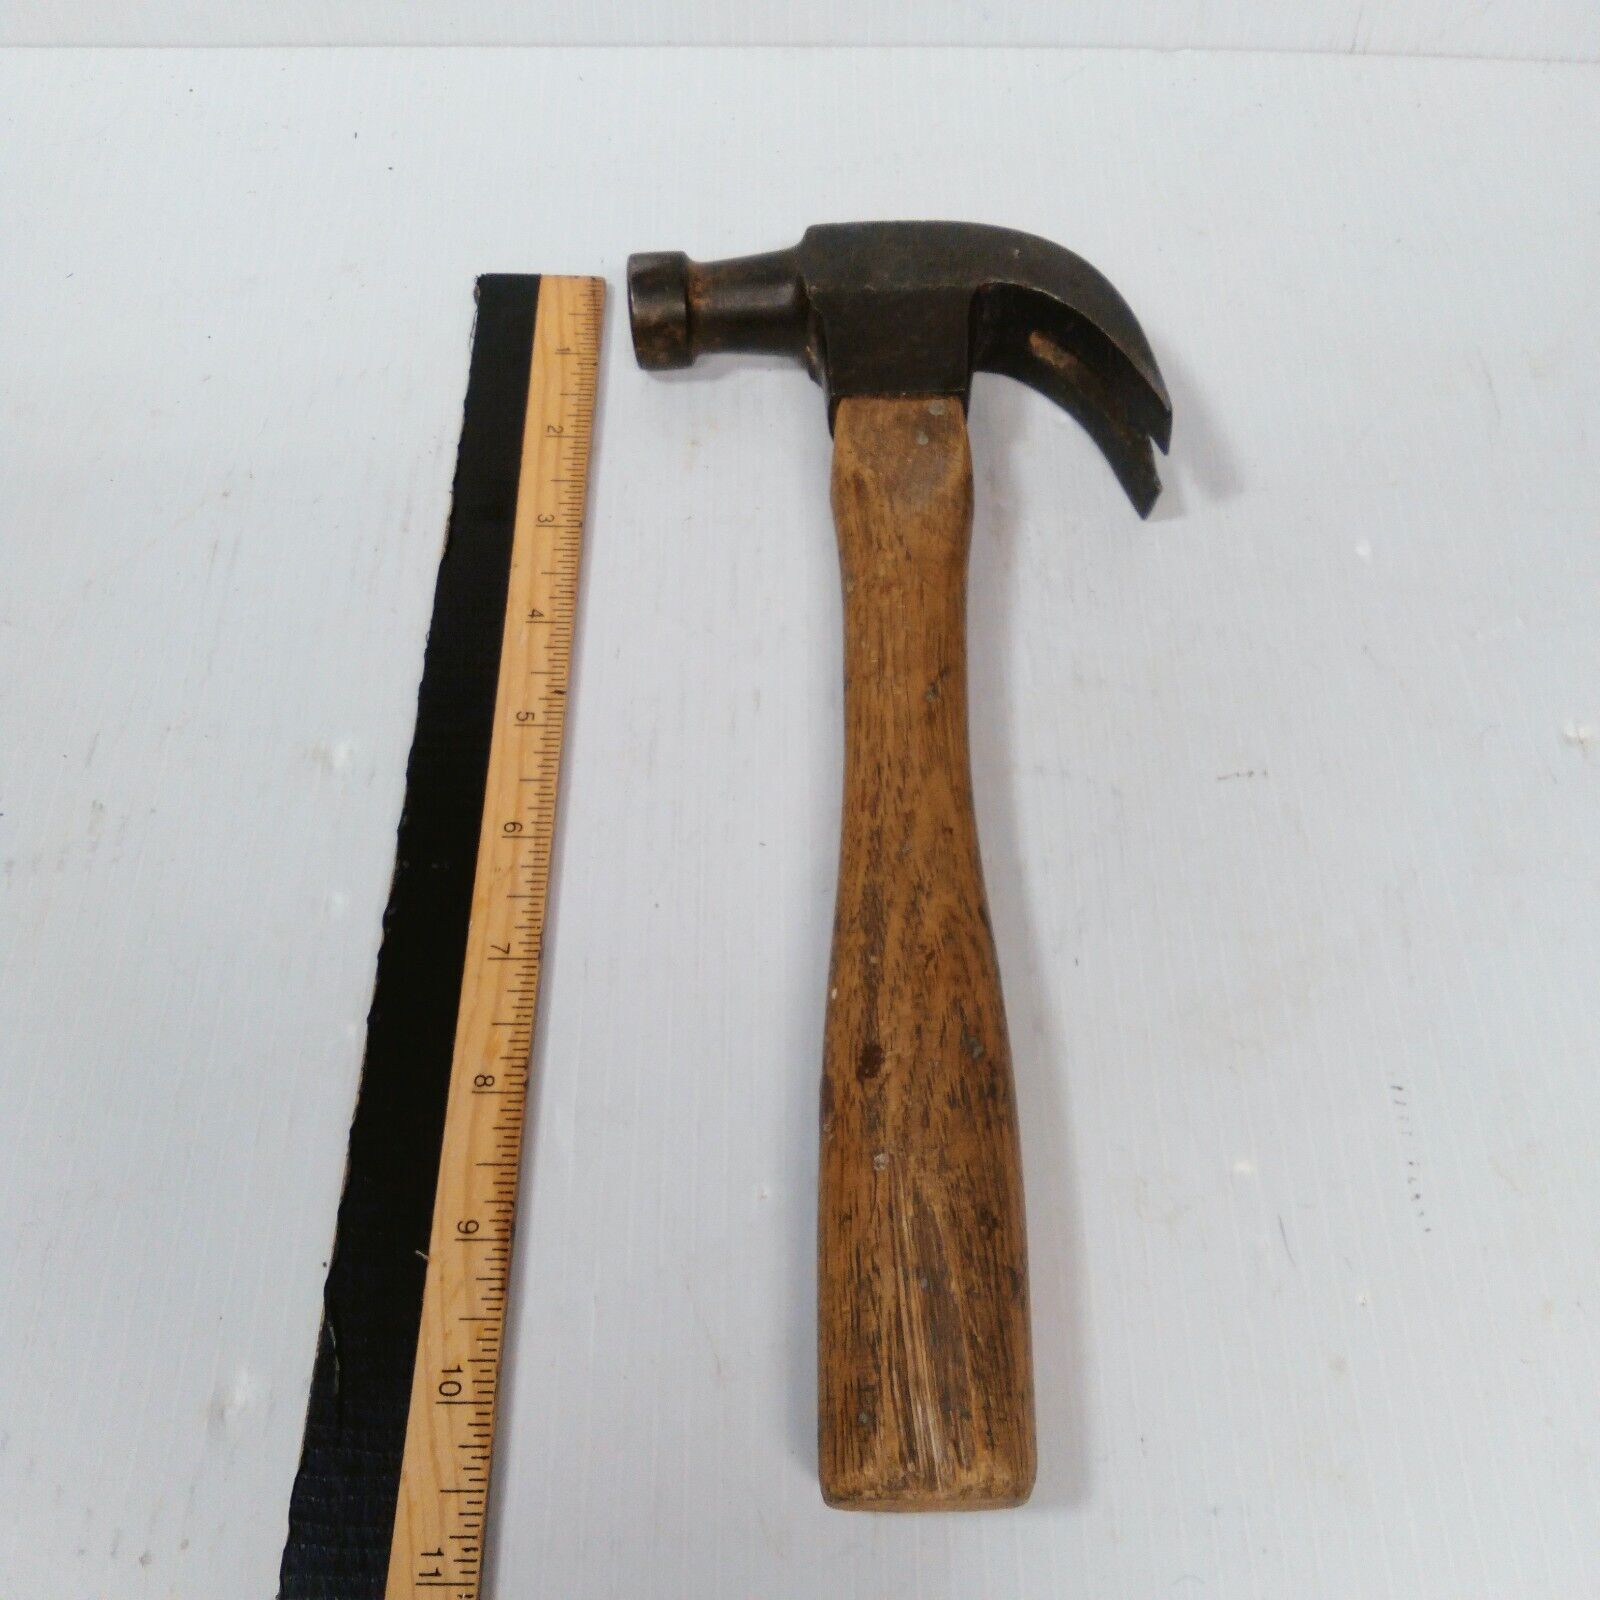 Antique Cheney Nail Holding Claw Hammer Plain Face Made in USA, Bearings Work